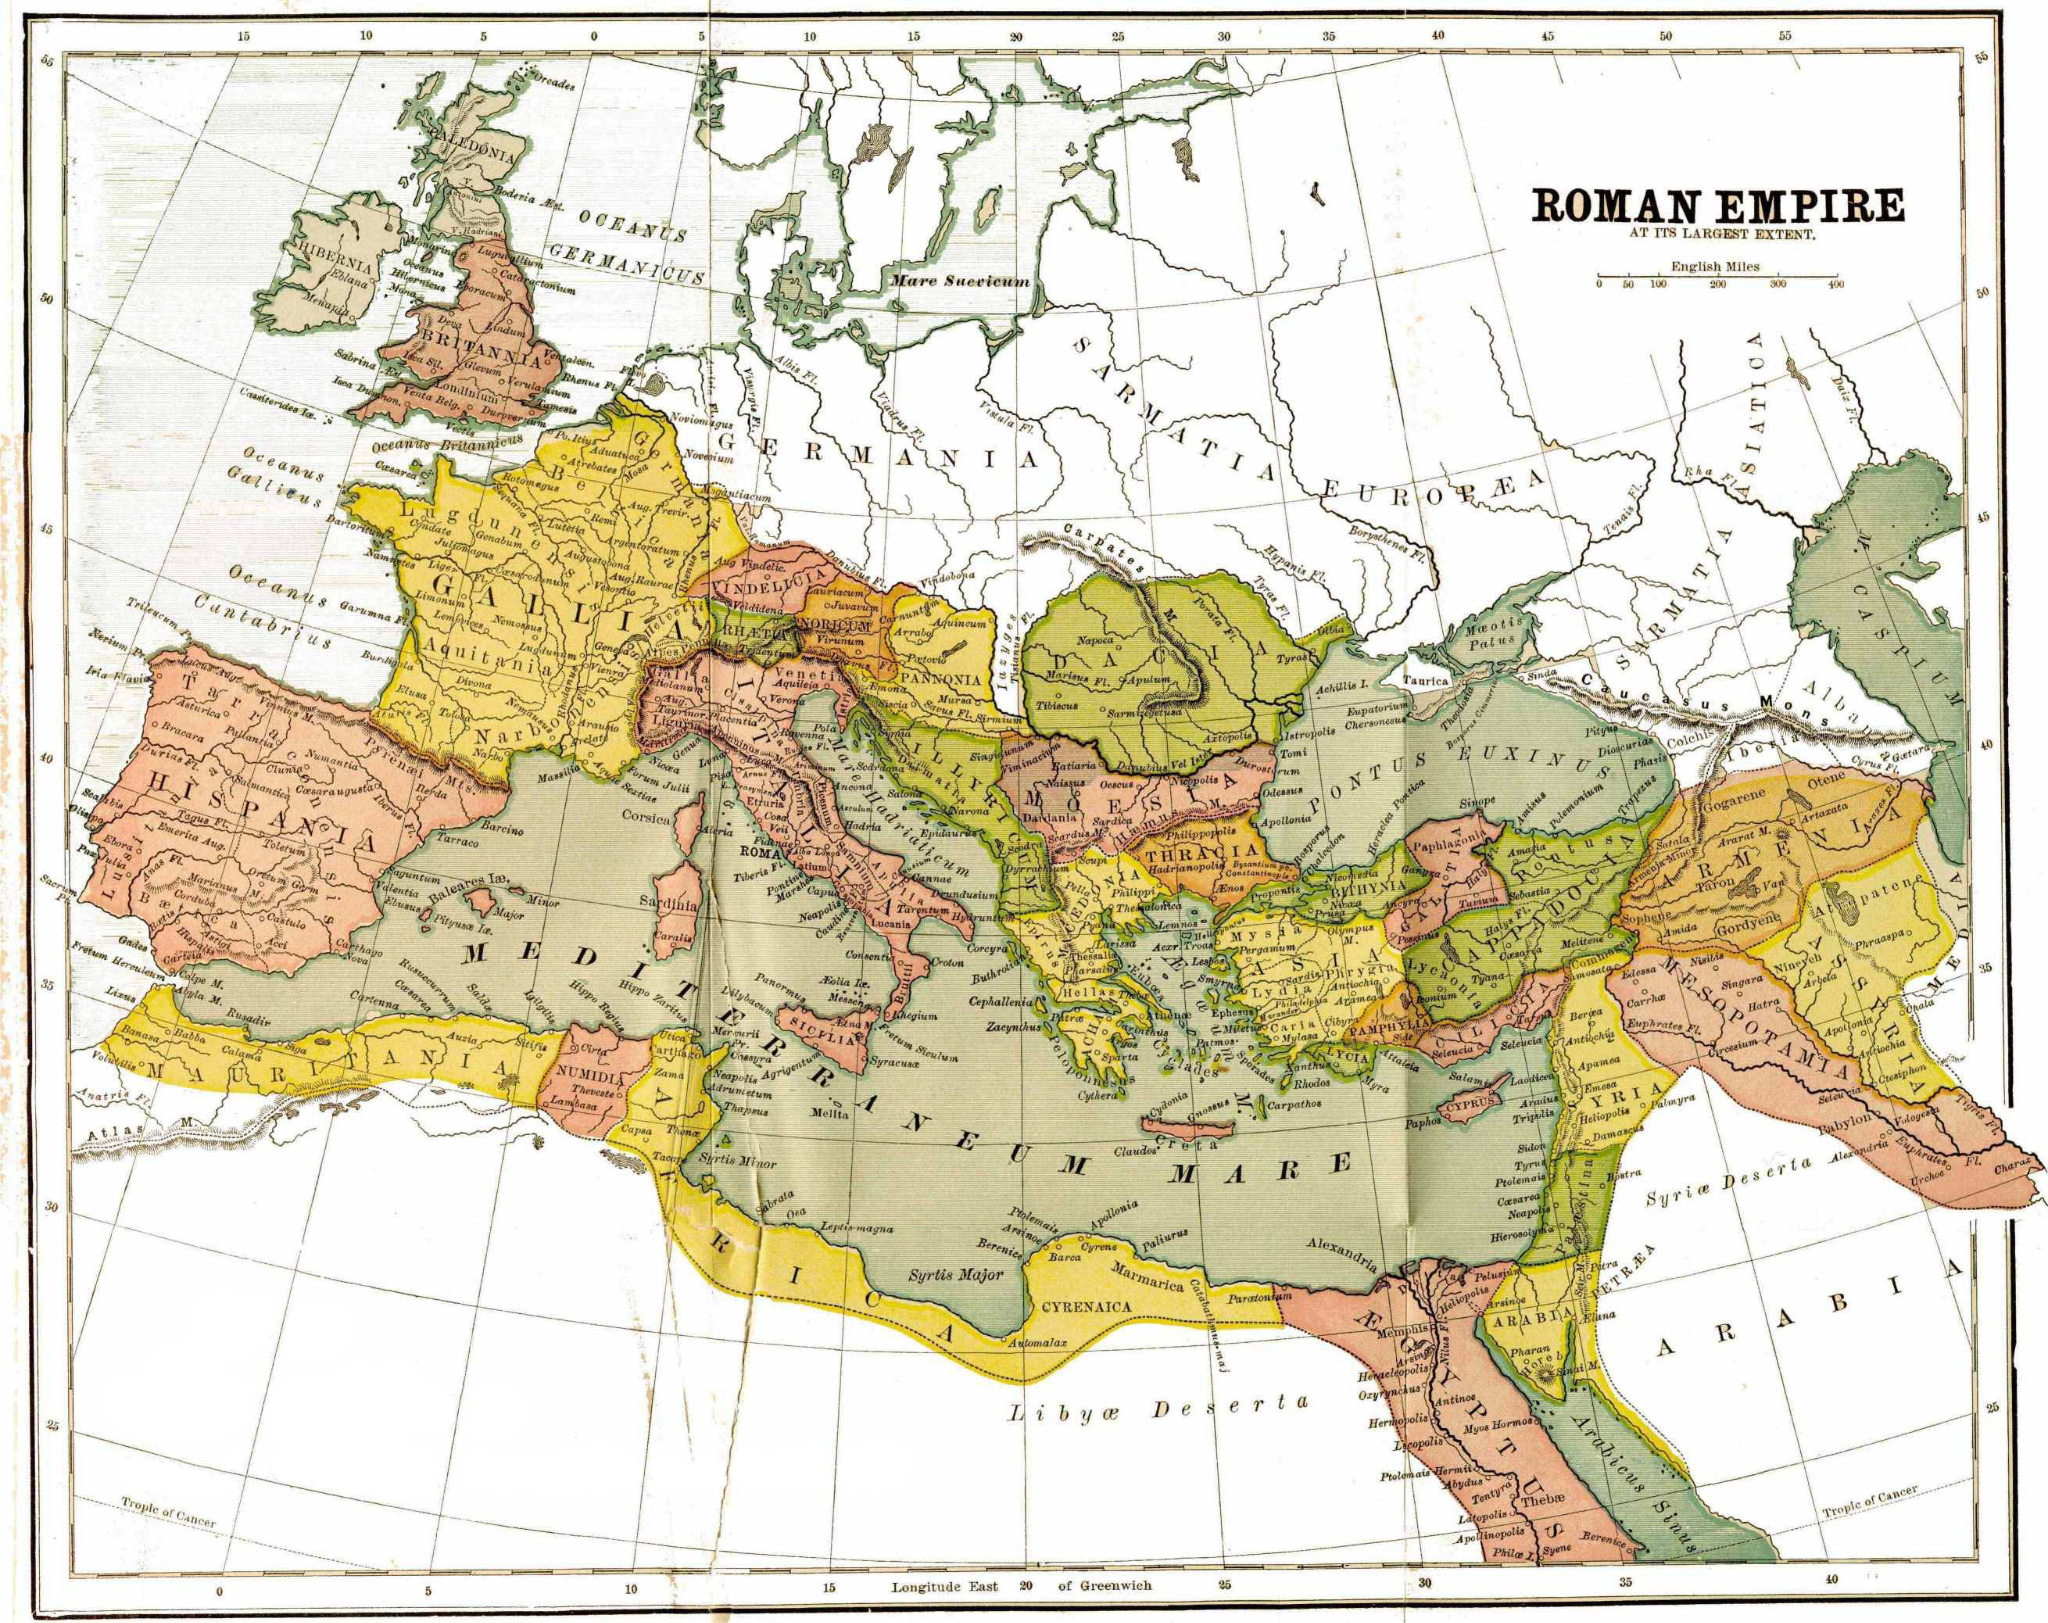 Map of the Roman Empire at its Largest Extent in C.E. 150.